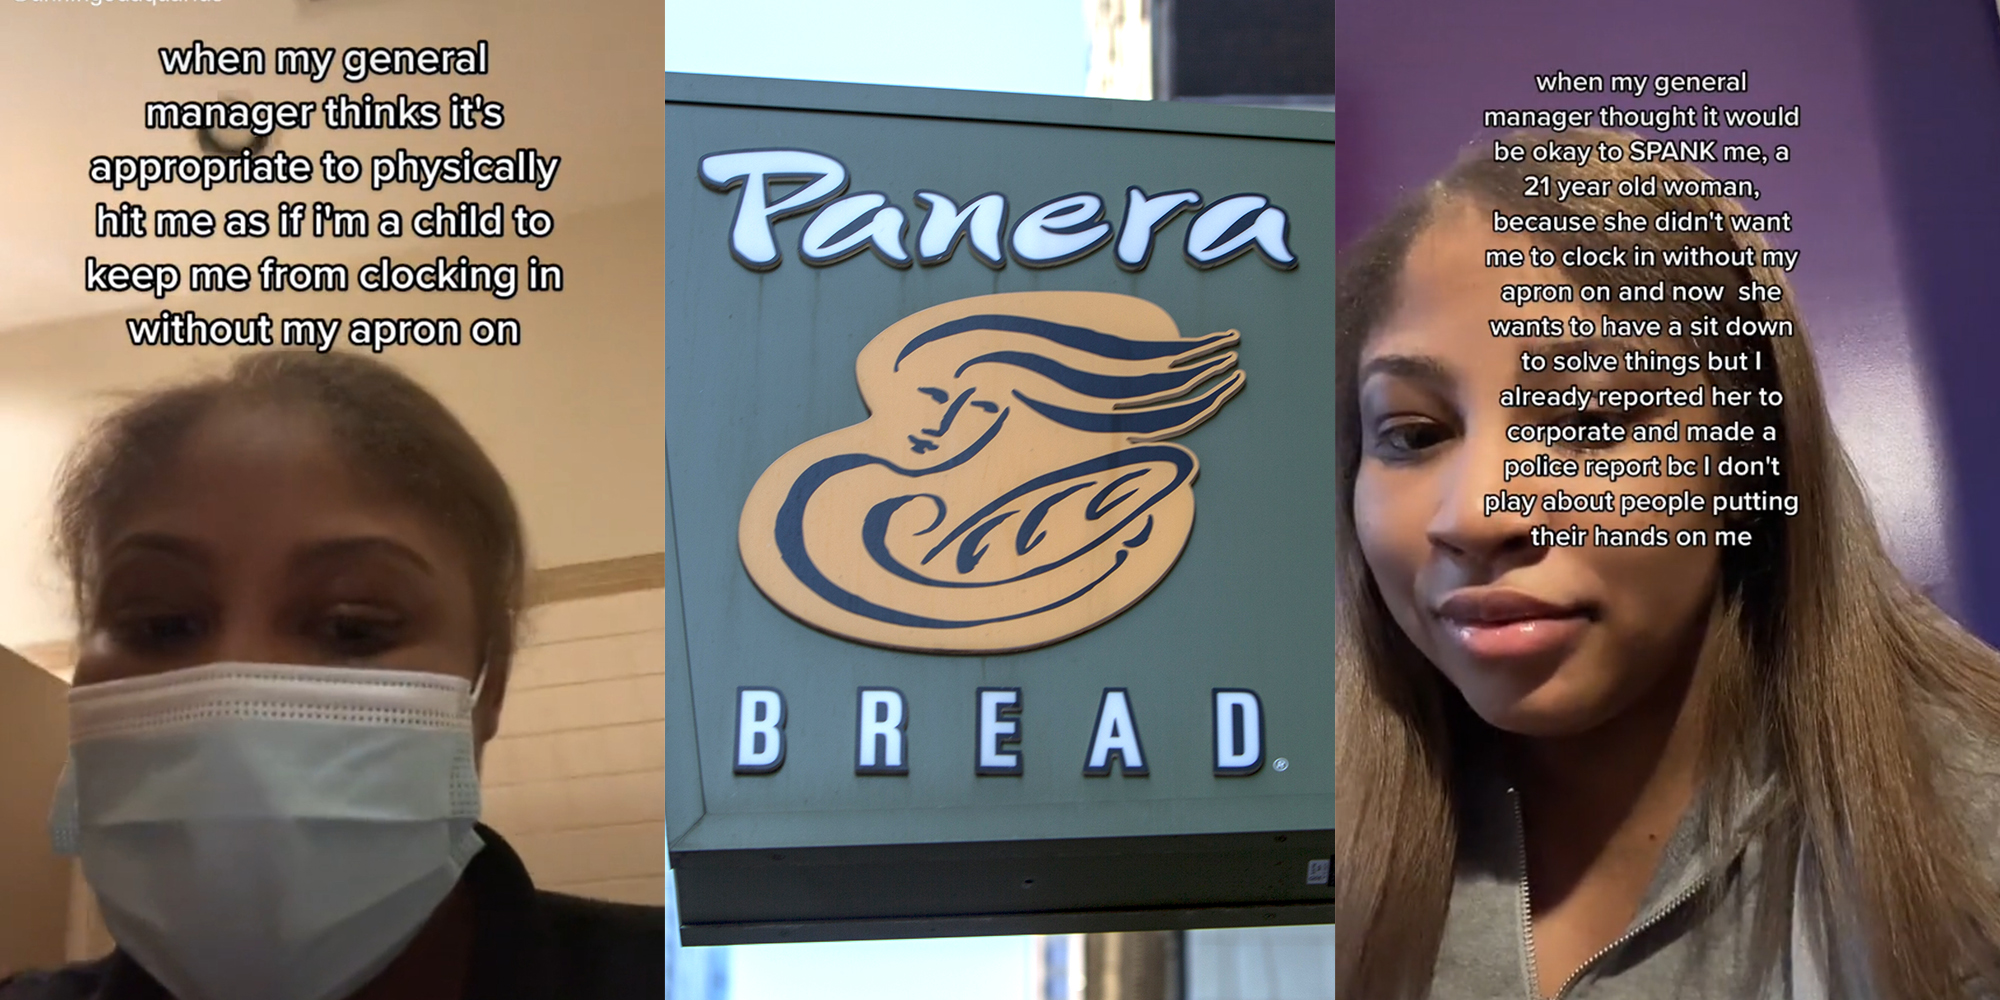 21-Year-Old Worker Says Her Manager at Panera Spanked image photo